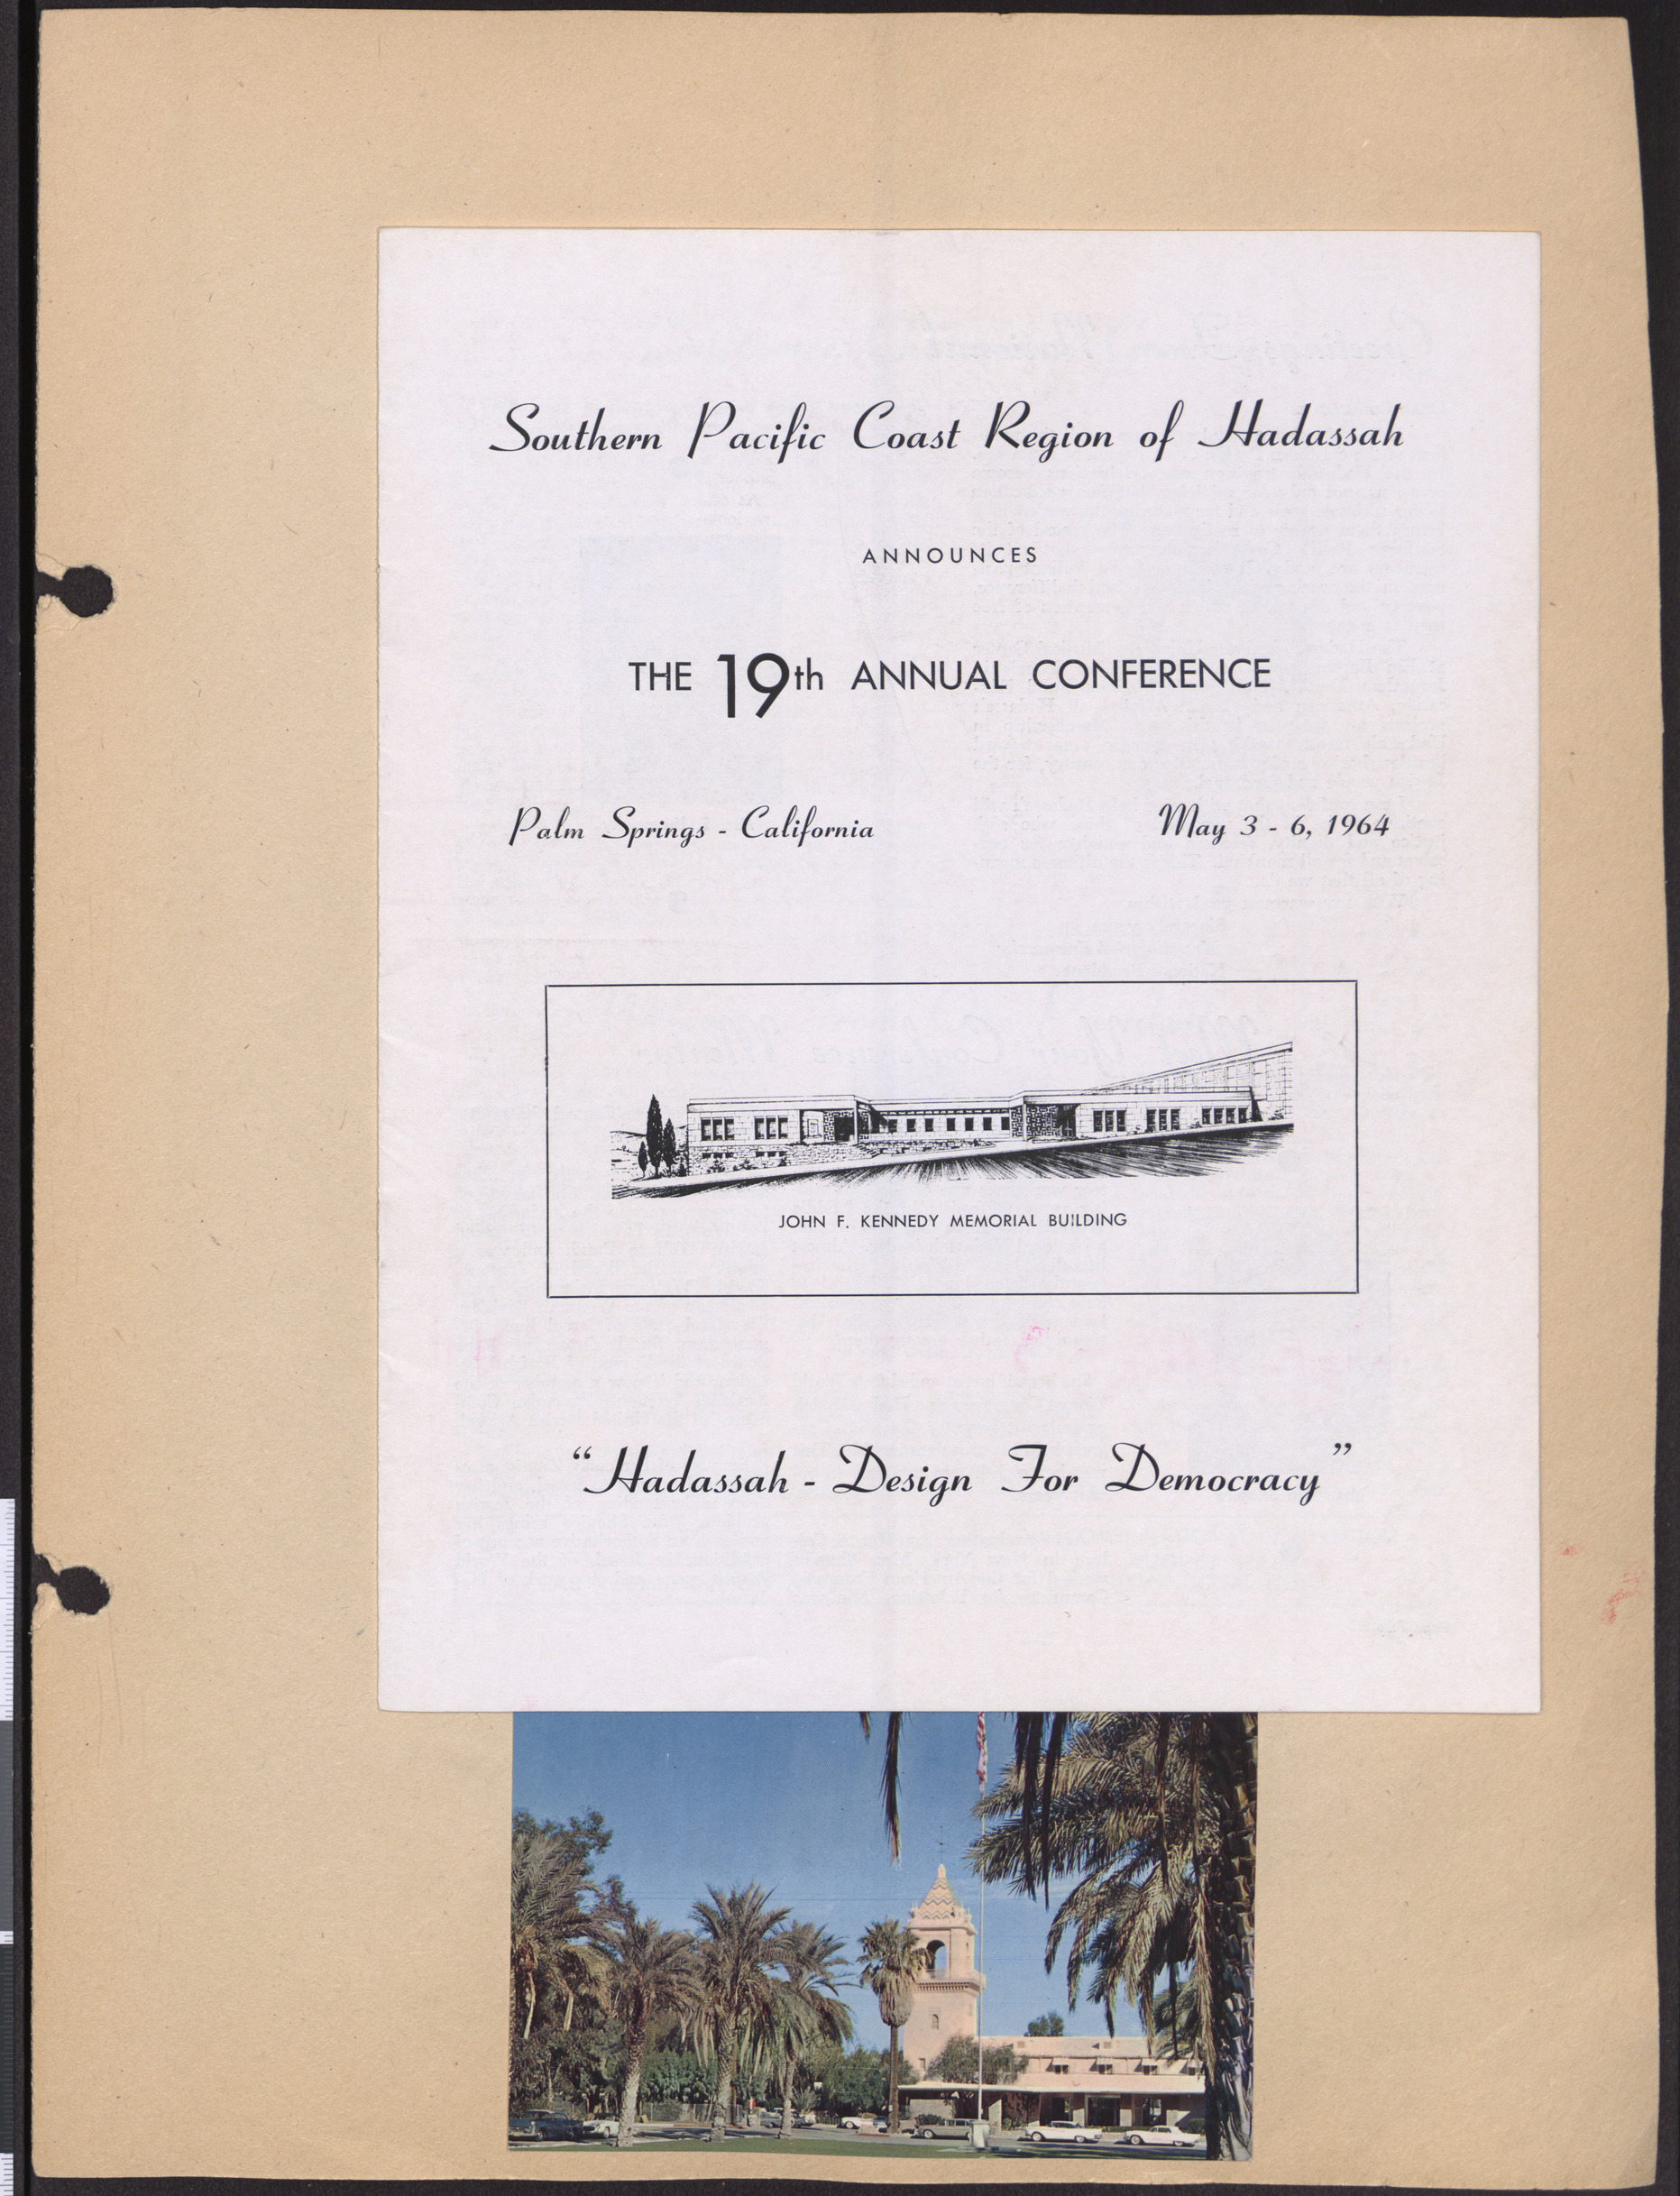 Conference program, Southern Pacific Coast Region of Hadassah, 19th annual conference, May 3-6, 1964, and postcard from Palm Springs, California